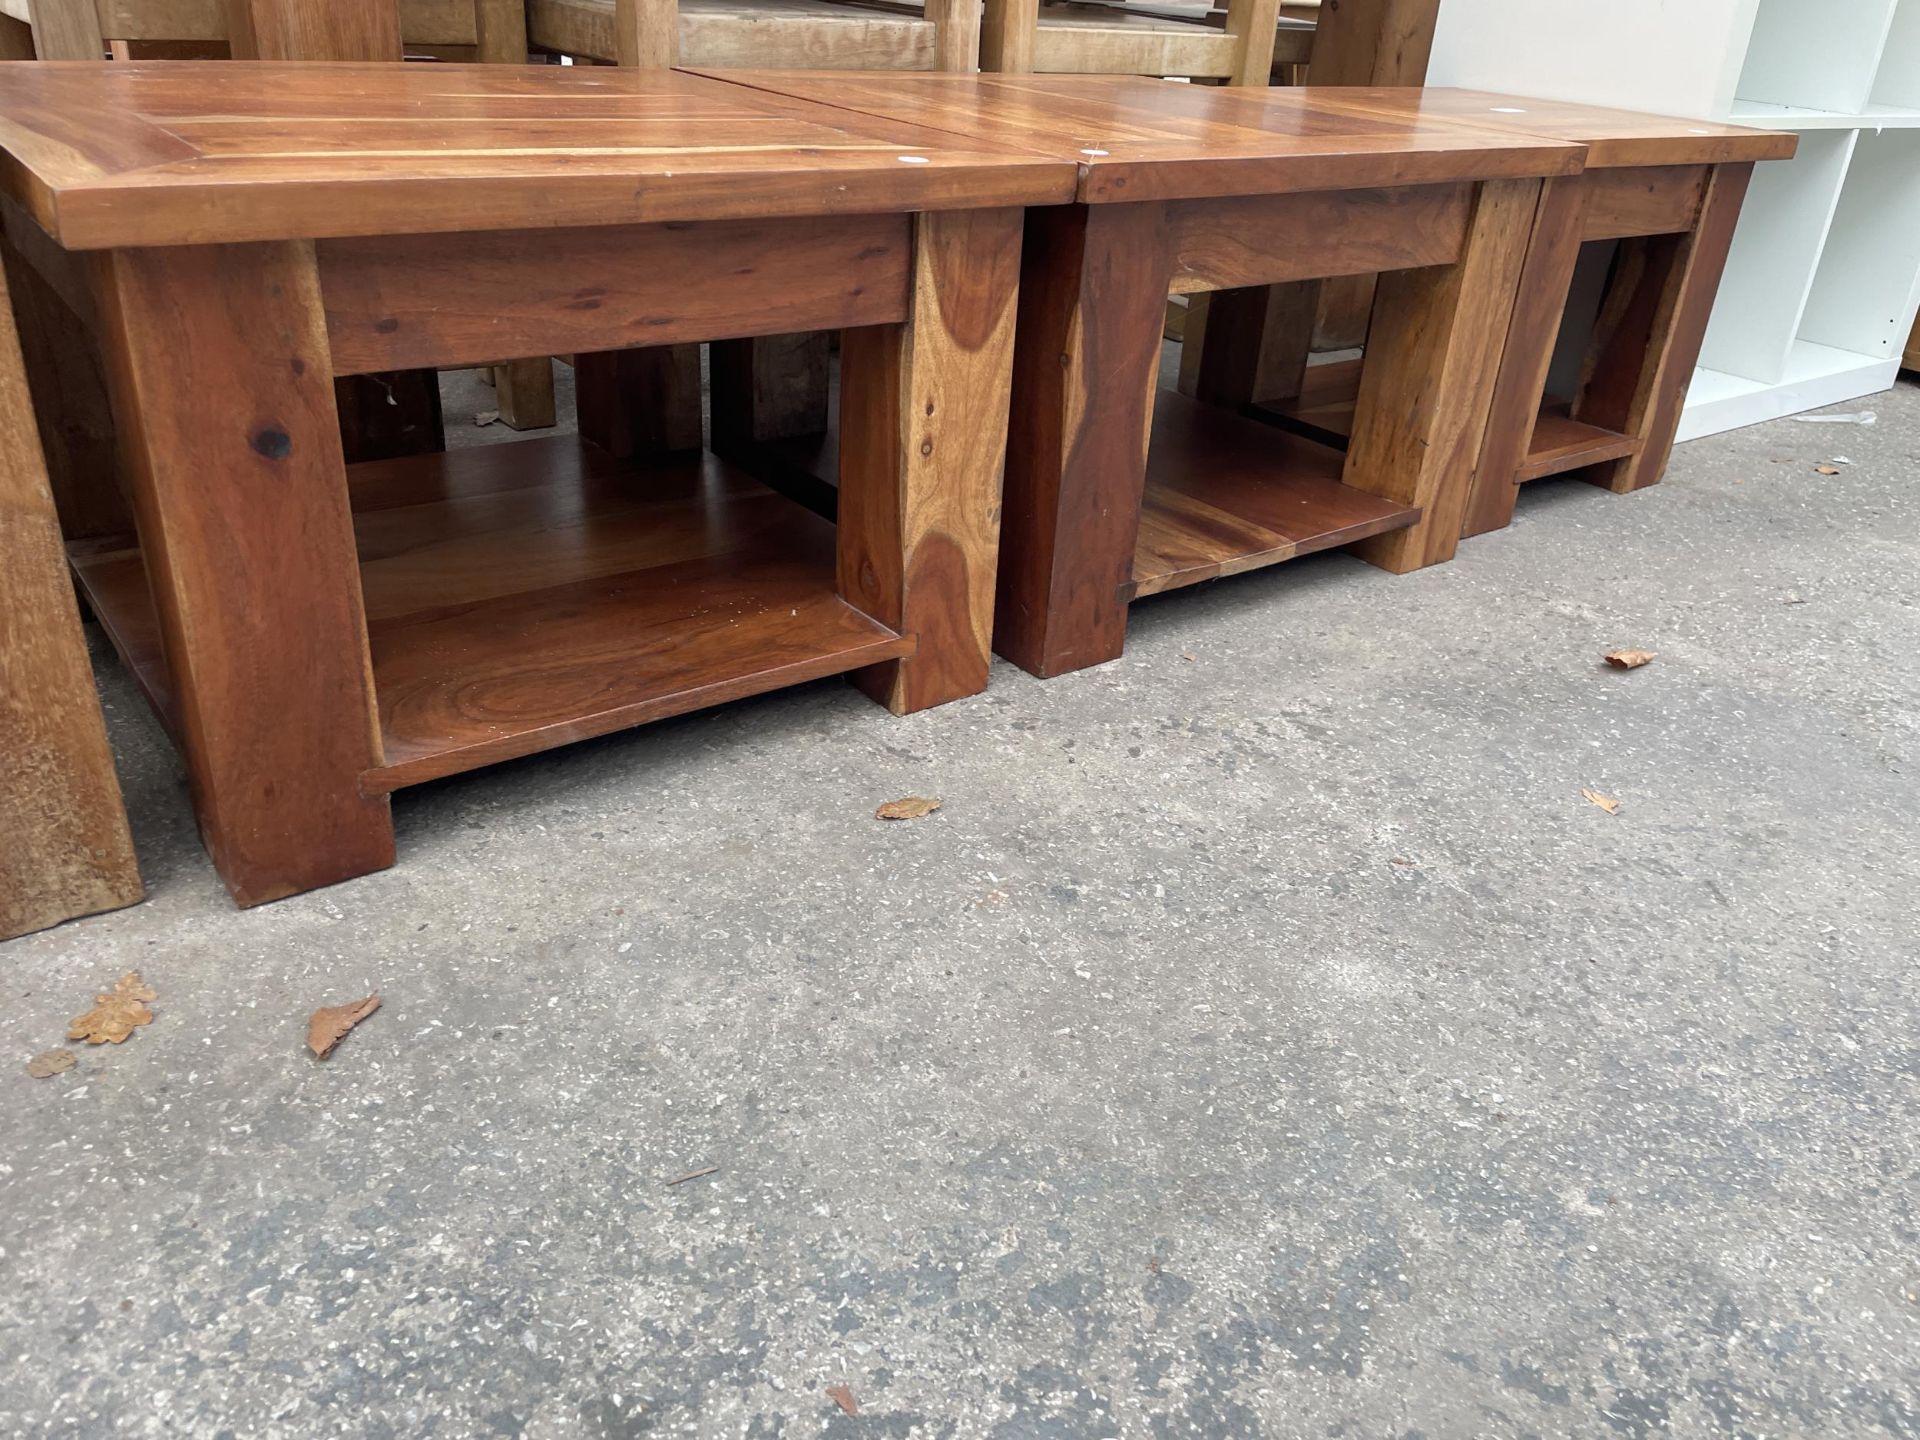 A PAIR OF HARDWOOD LAMP TABLES, 24" SQUARE EACH AND A SMALLER TABLE 18" SQUARE - Image 2 of 3